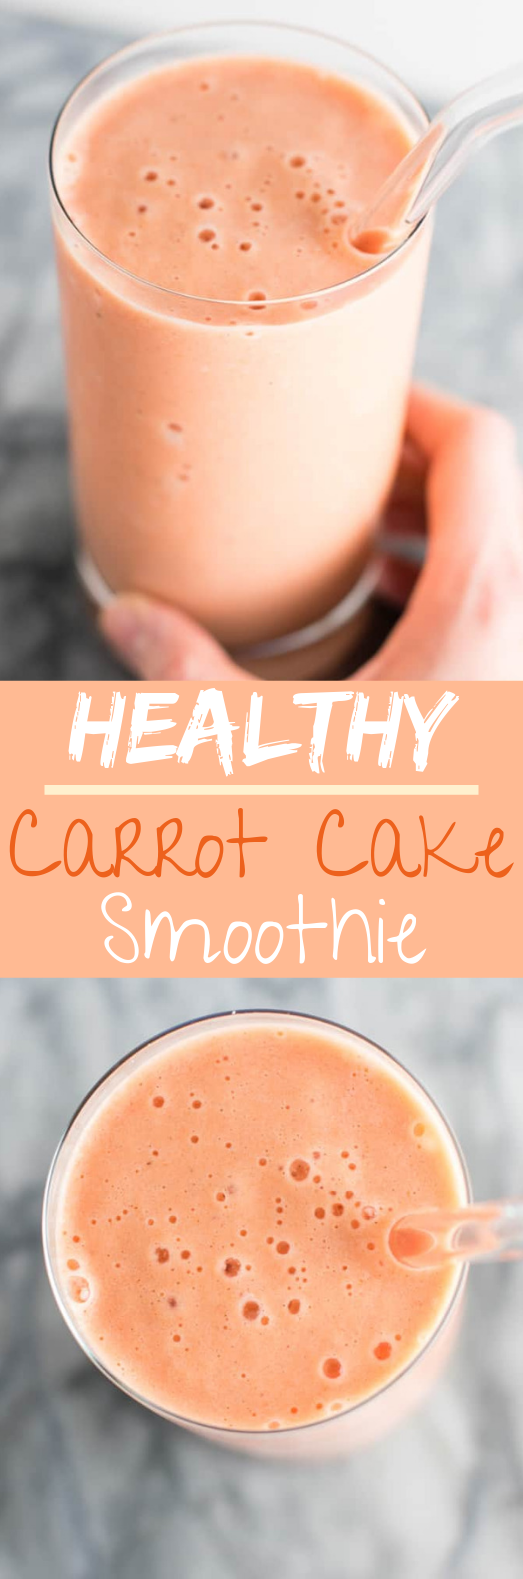 Carrot Cake Smoothie #drinks #smoothies